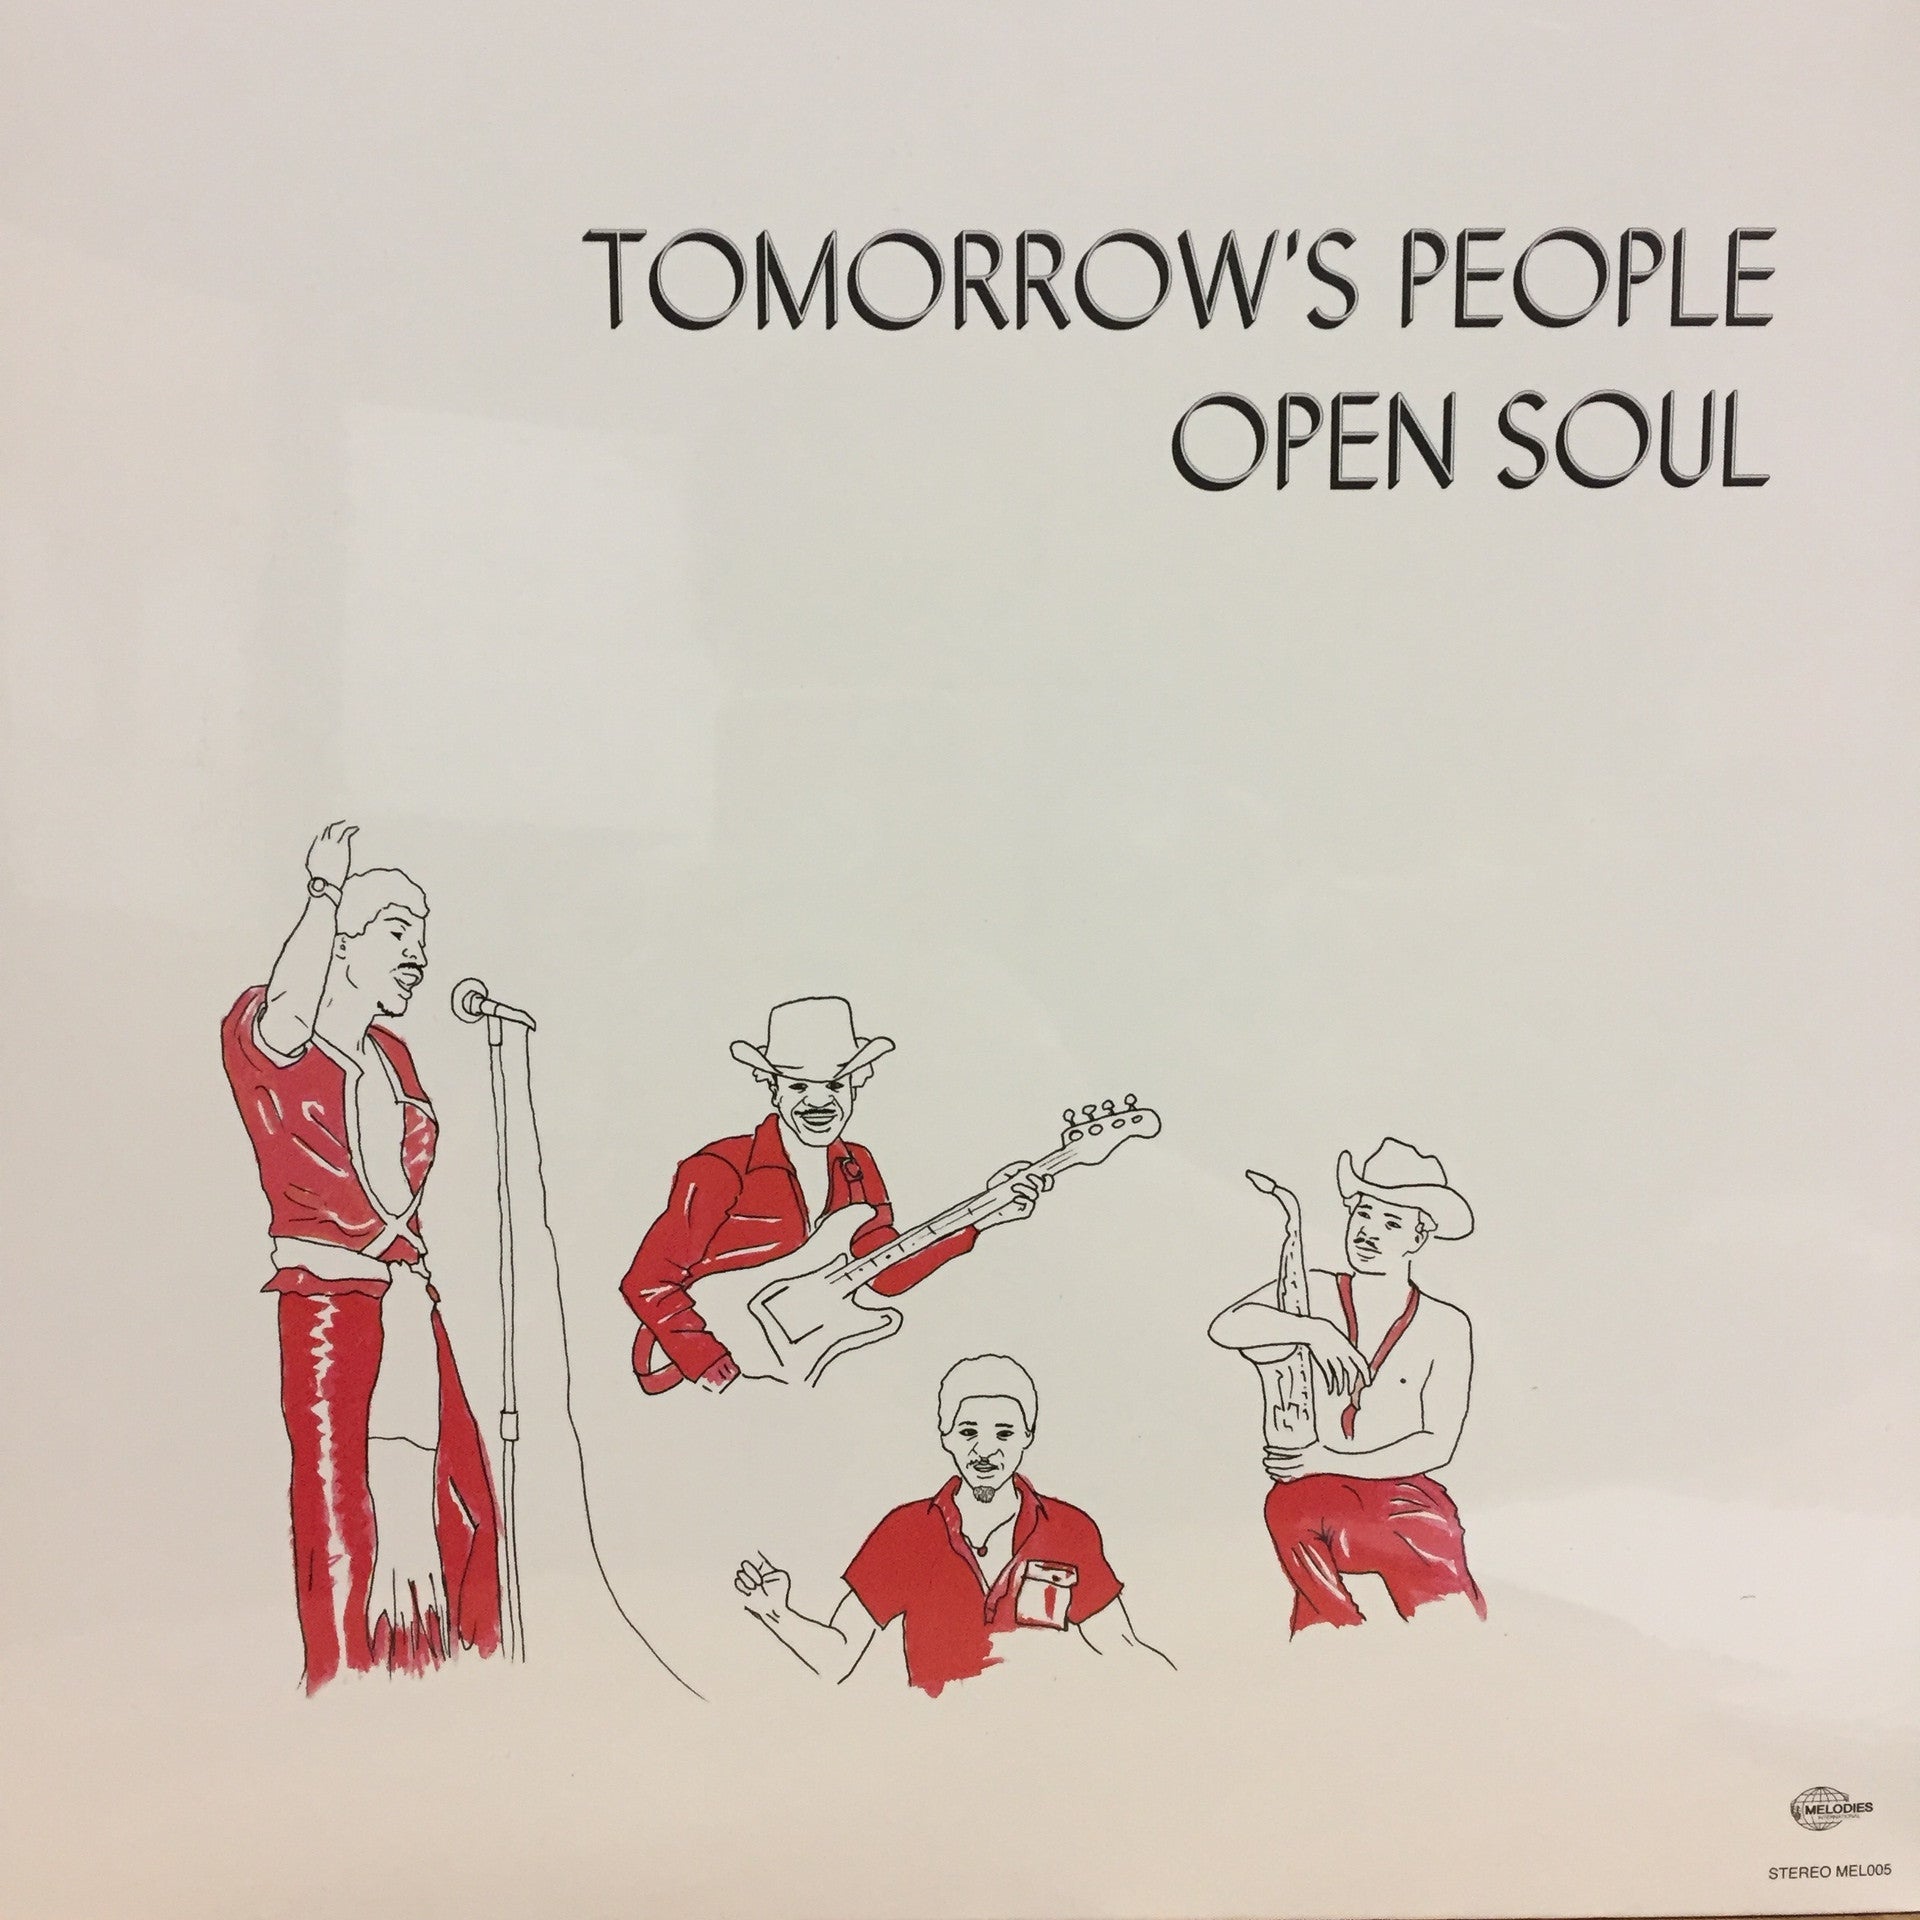 Tomorrow's People ‎– Open Soul (1976) - New Vinyl Record 2017 Melodies International Reissue (Limited Edition UK Import) - Funk / Soul